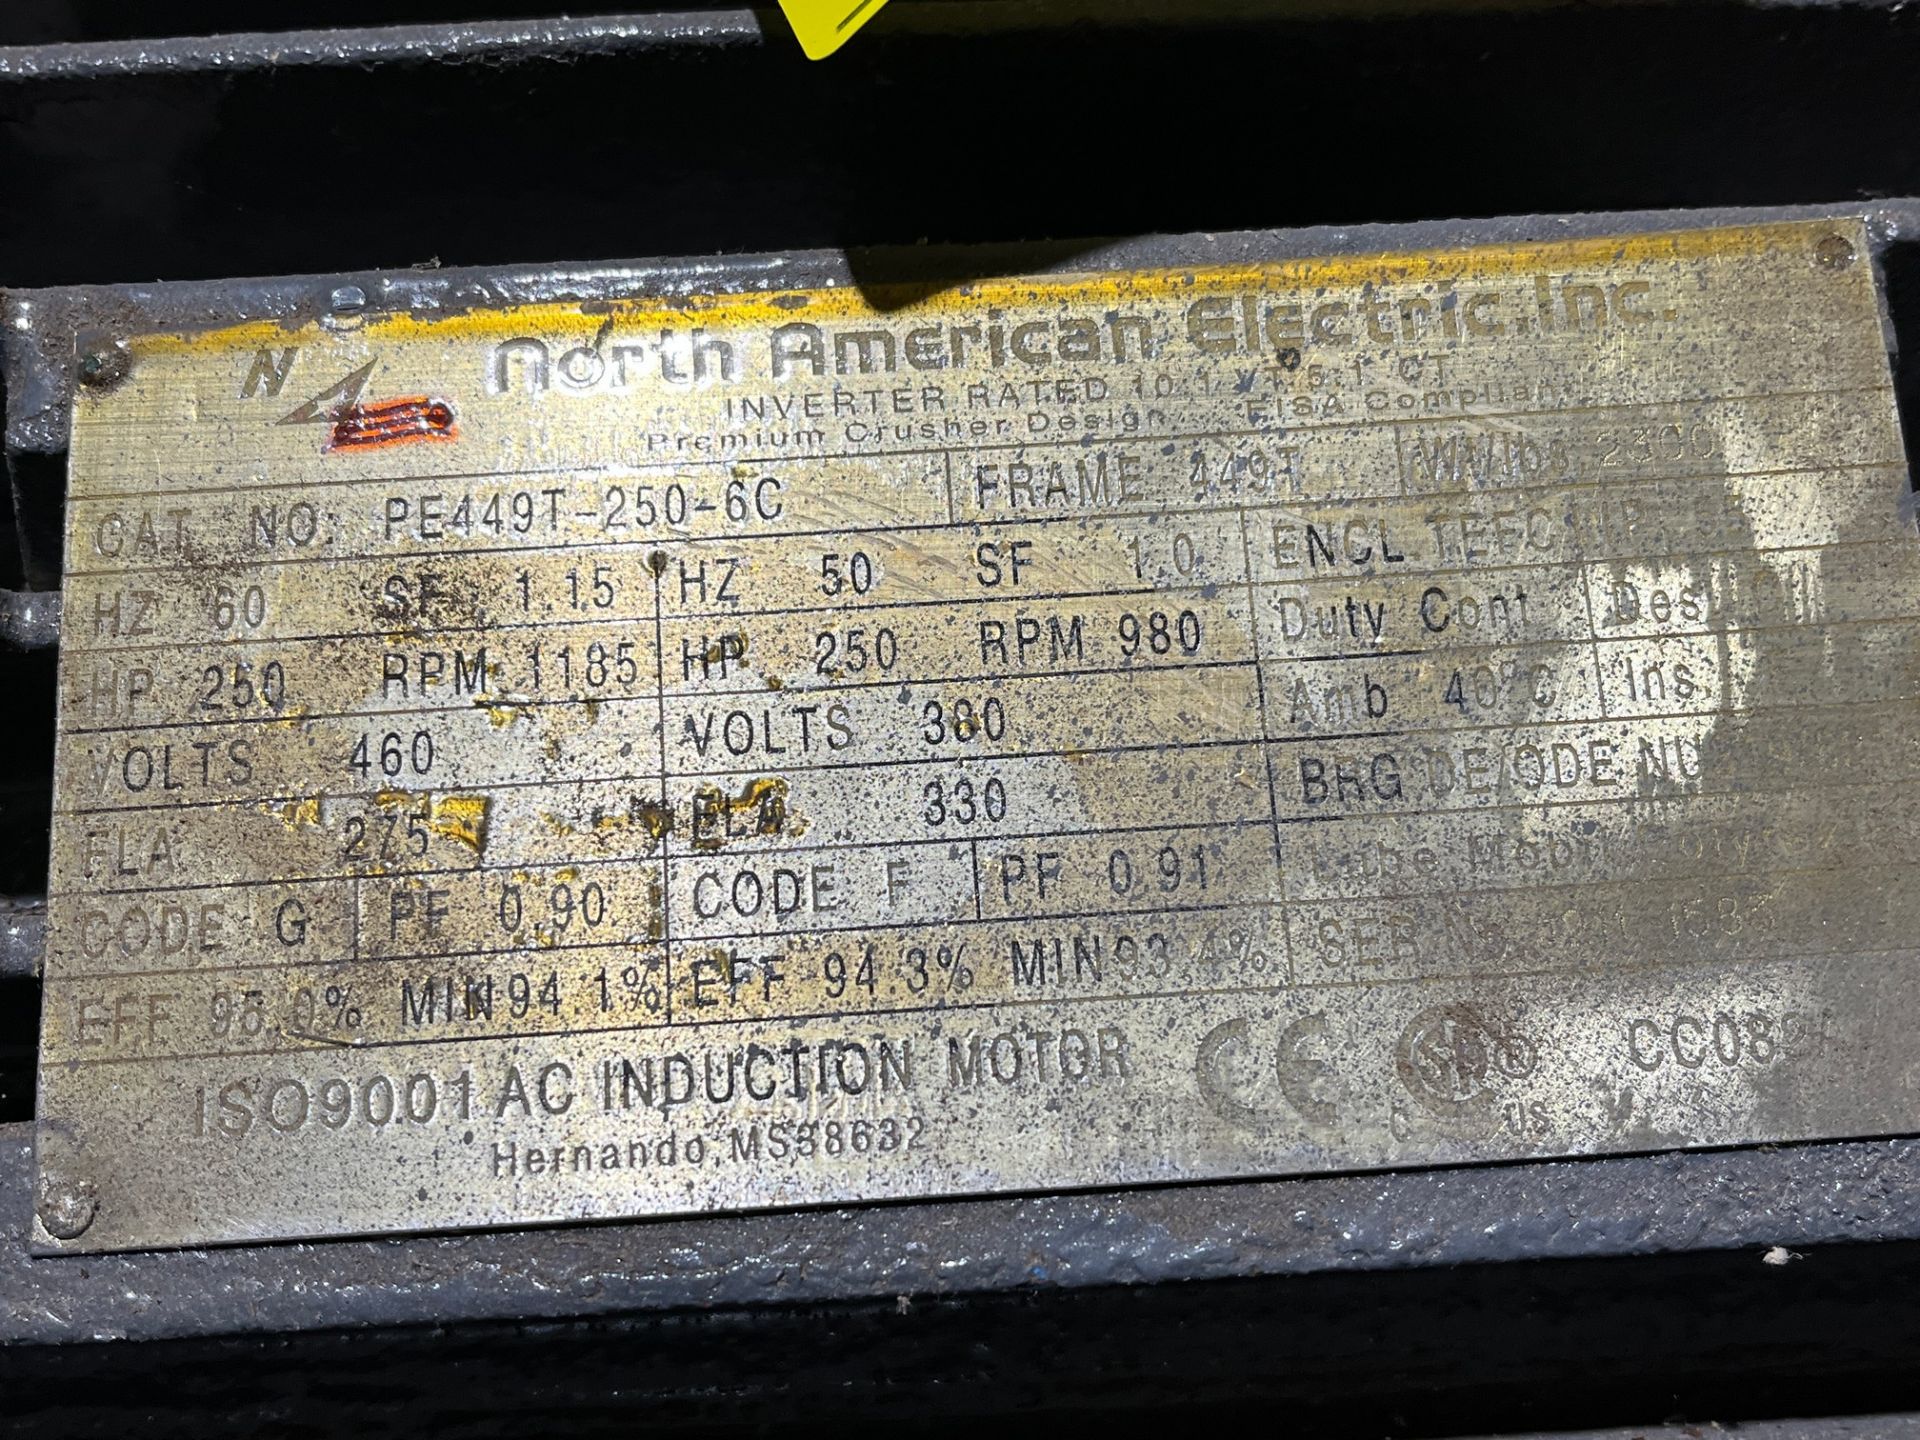 NORTH AMERICAN ELECTRIC 250HP ELECTRIC MOTOR, 1,185 RPM, 460V, 449T FRAME (PAPER MACHINE BASEMENT) - Image 2 of 2